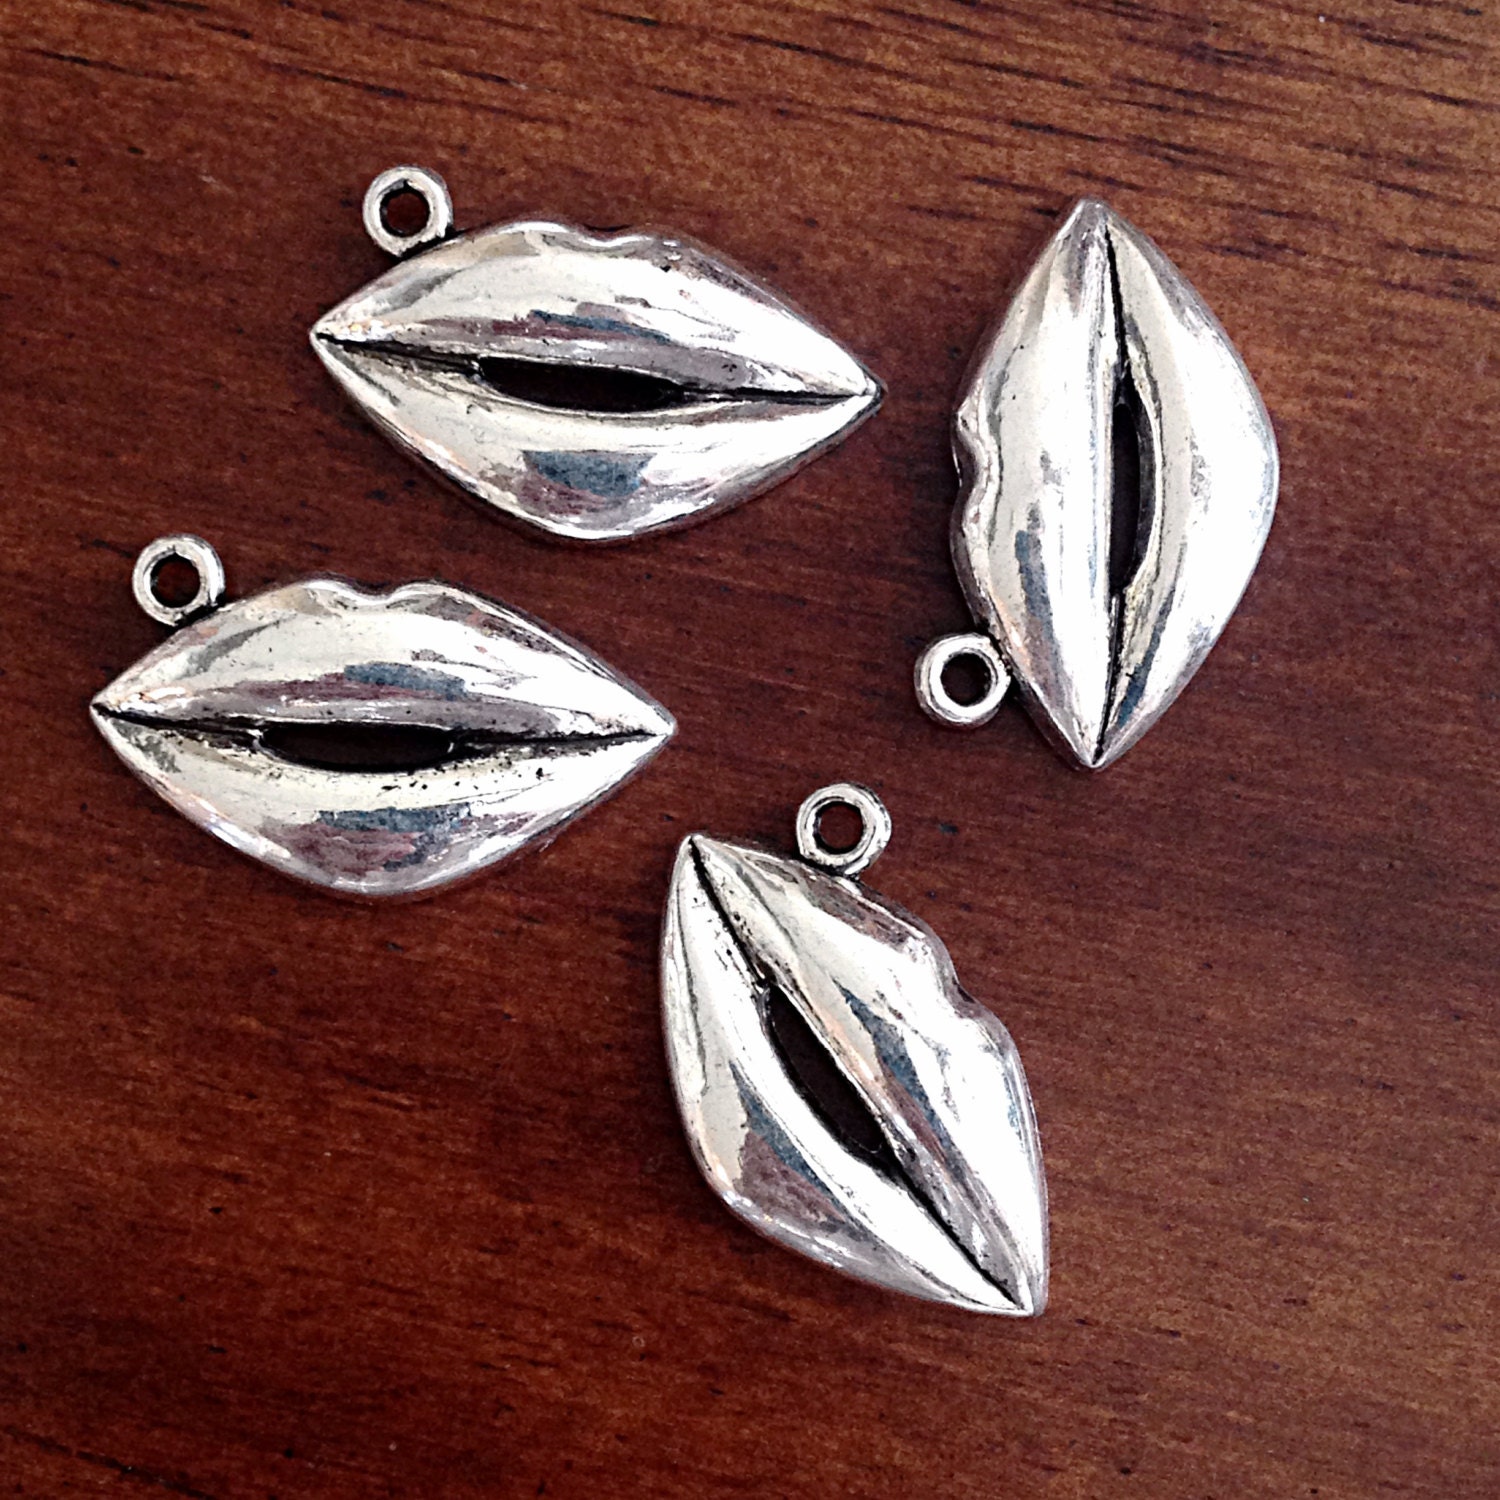 12pcs, Lips Charms, Antique Silver Lips Charms, Silver Lips Charms, Valentine Charms, Kissing Charms, Jewelry and Craft Supplies, Findings